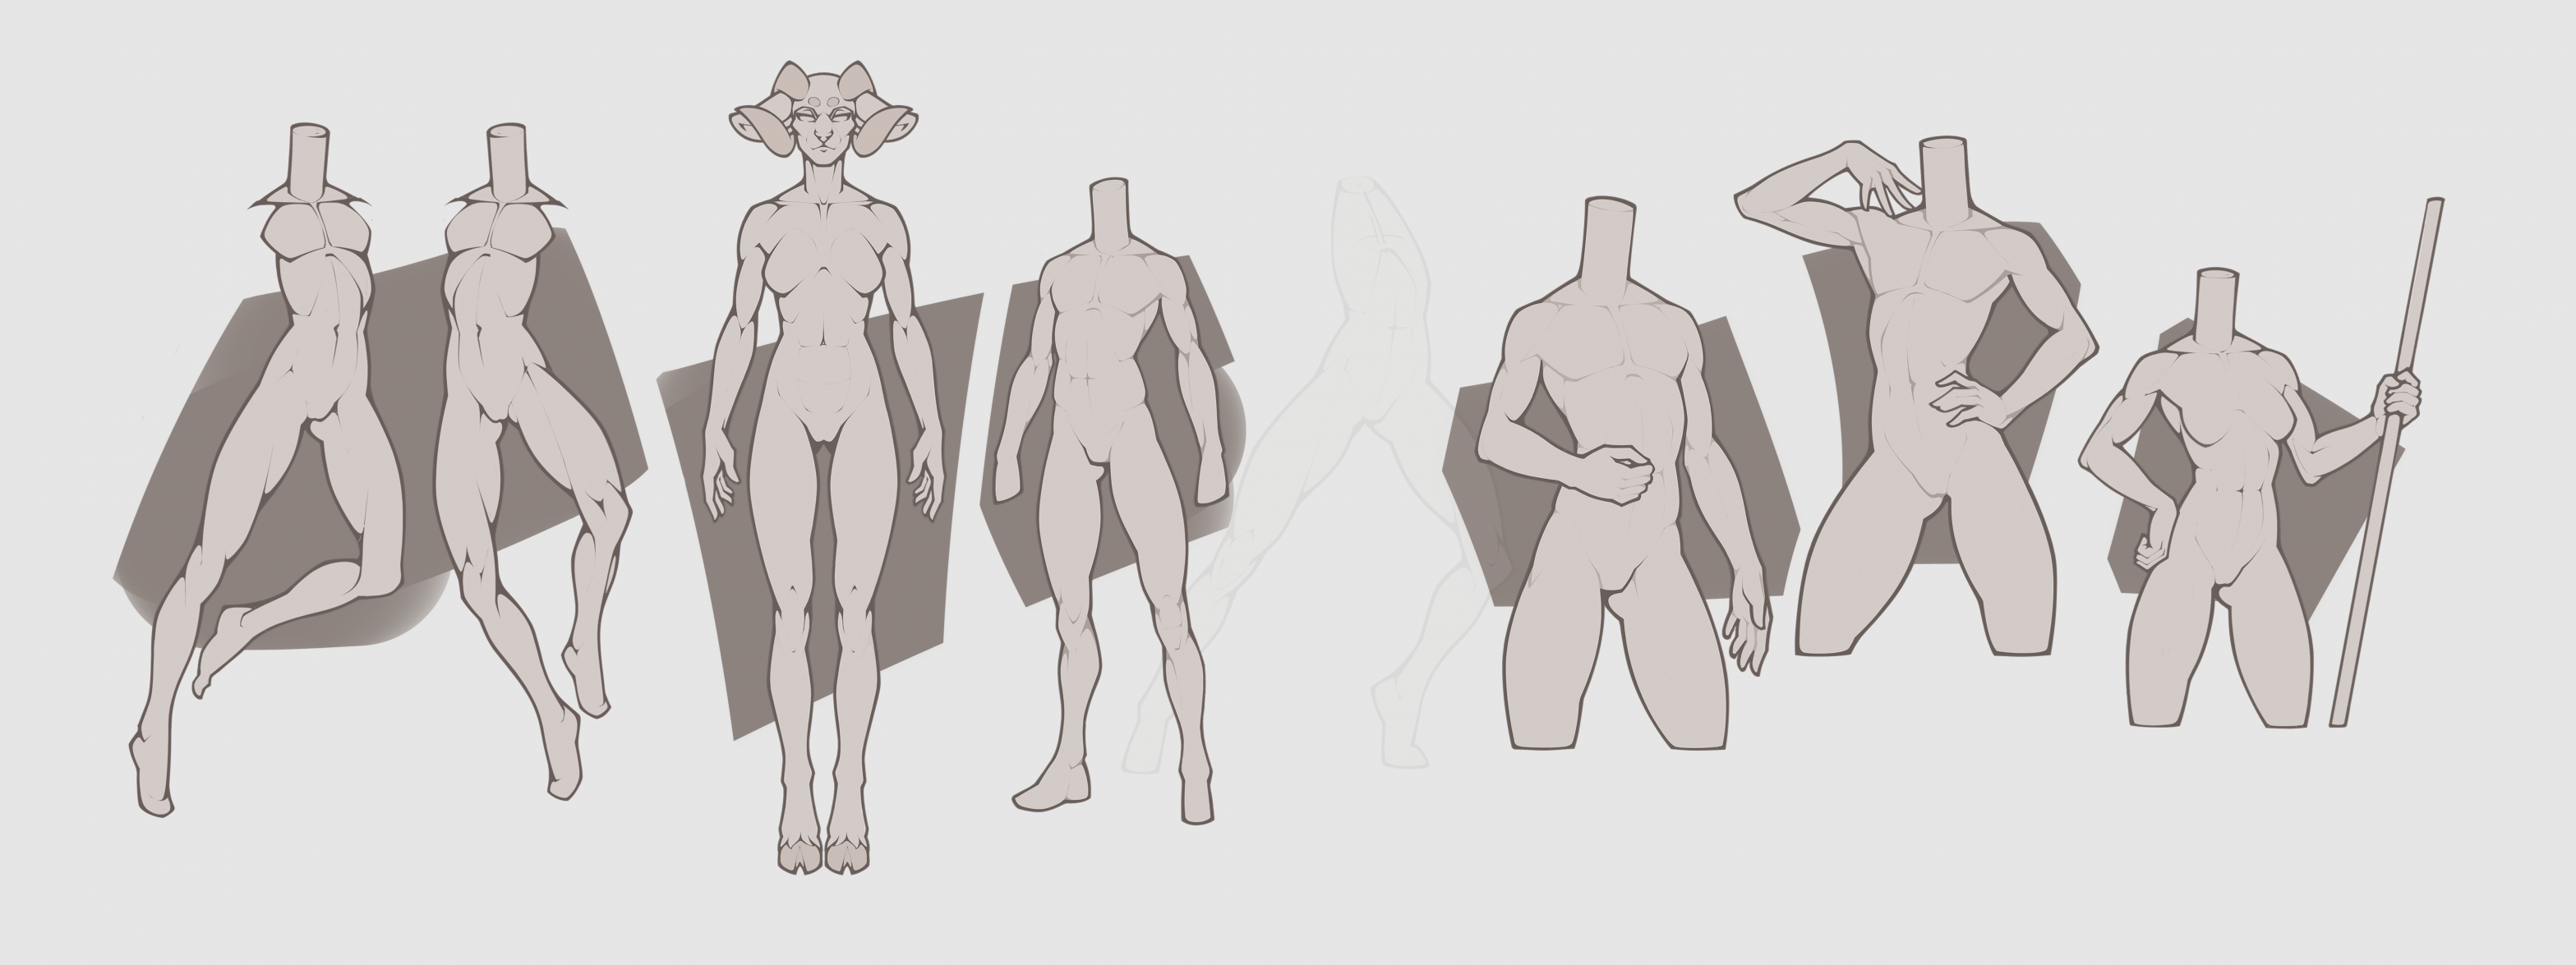 character poses study | Stable Diffusion